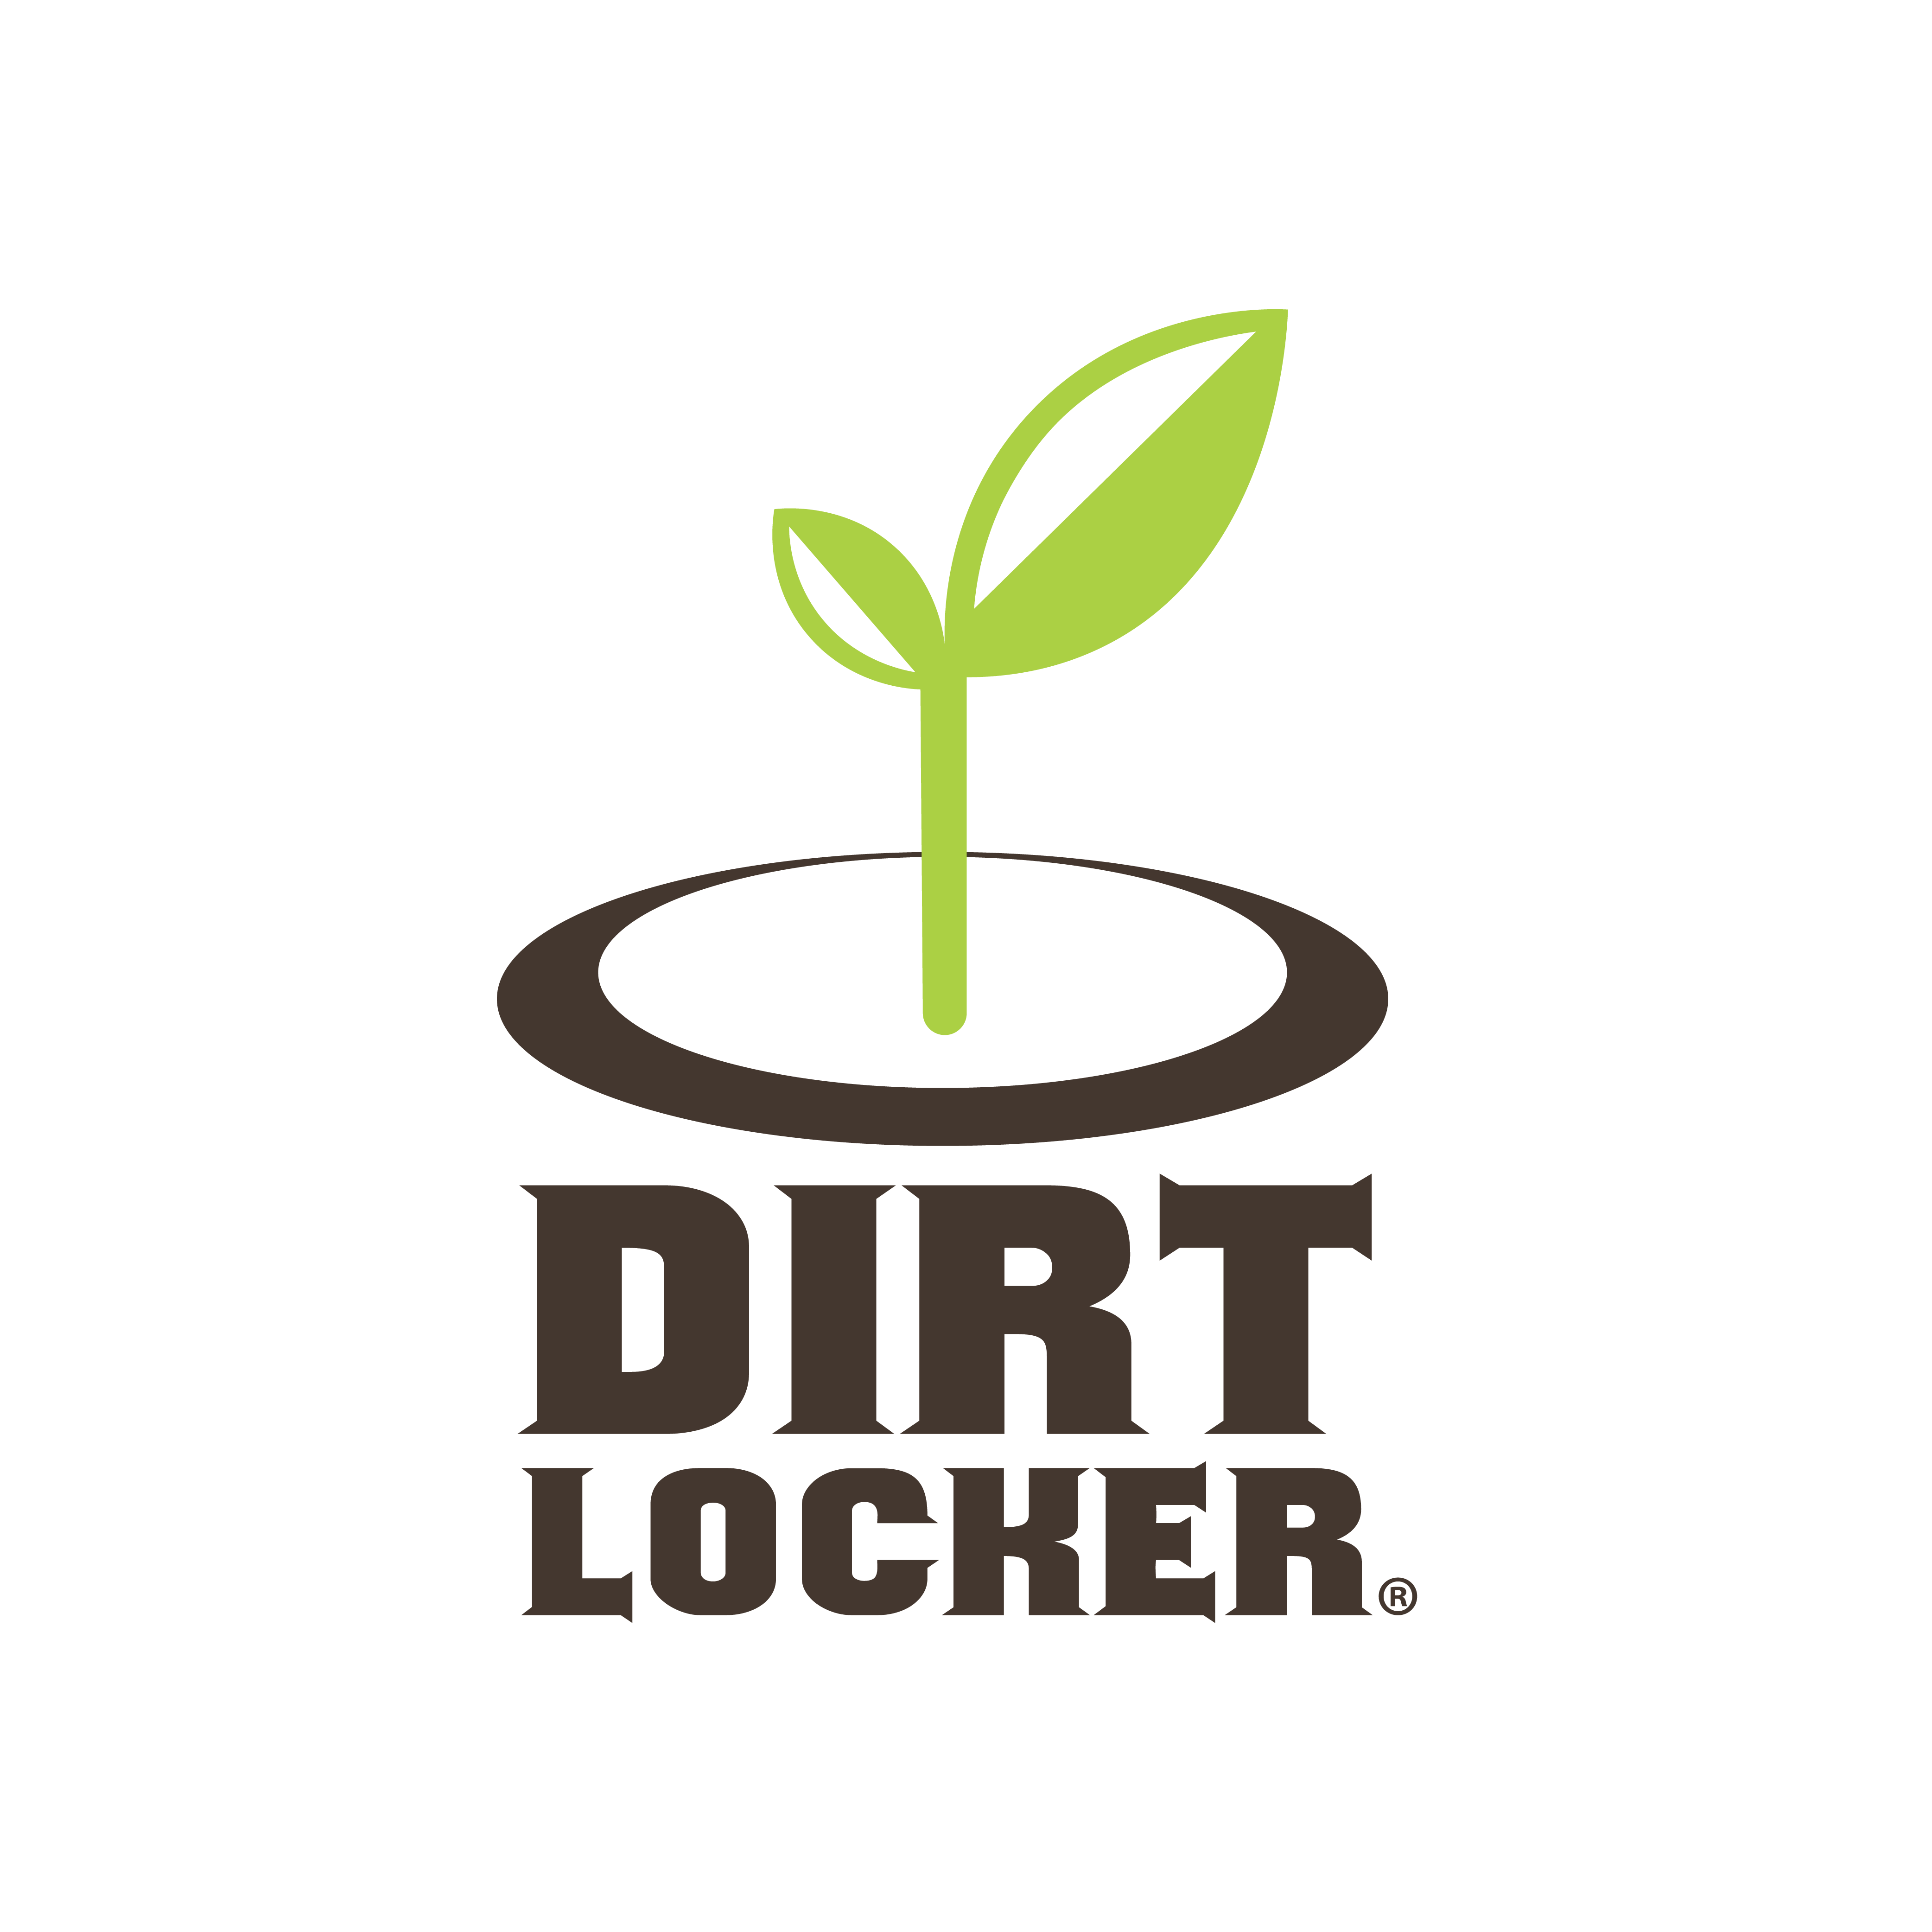 FAQ: What Is Fill Dirt For? - Southern Landscaping Materials